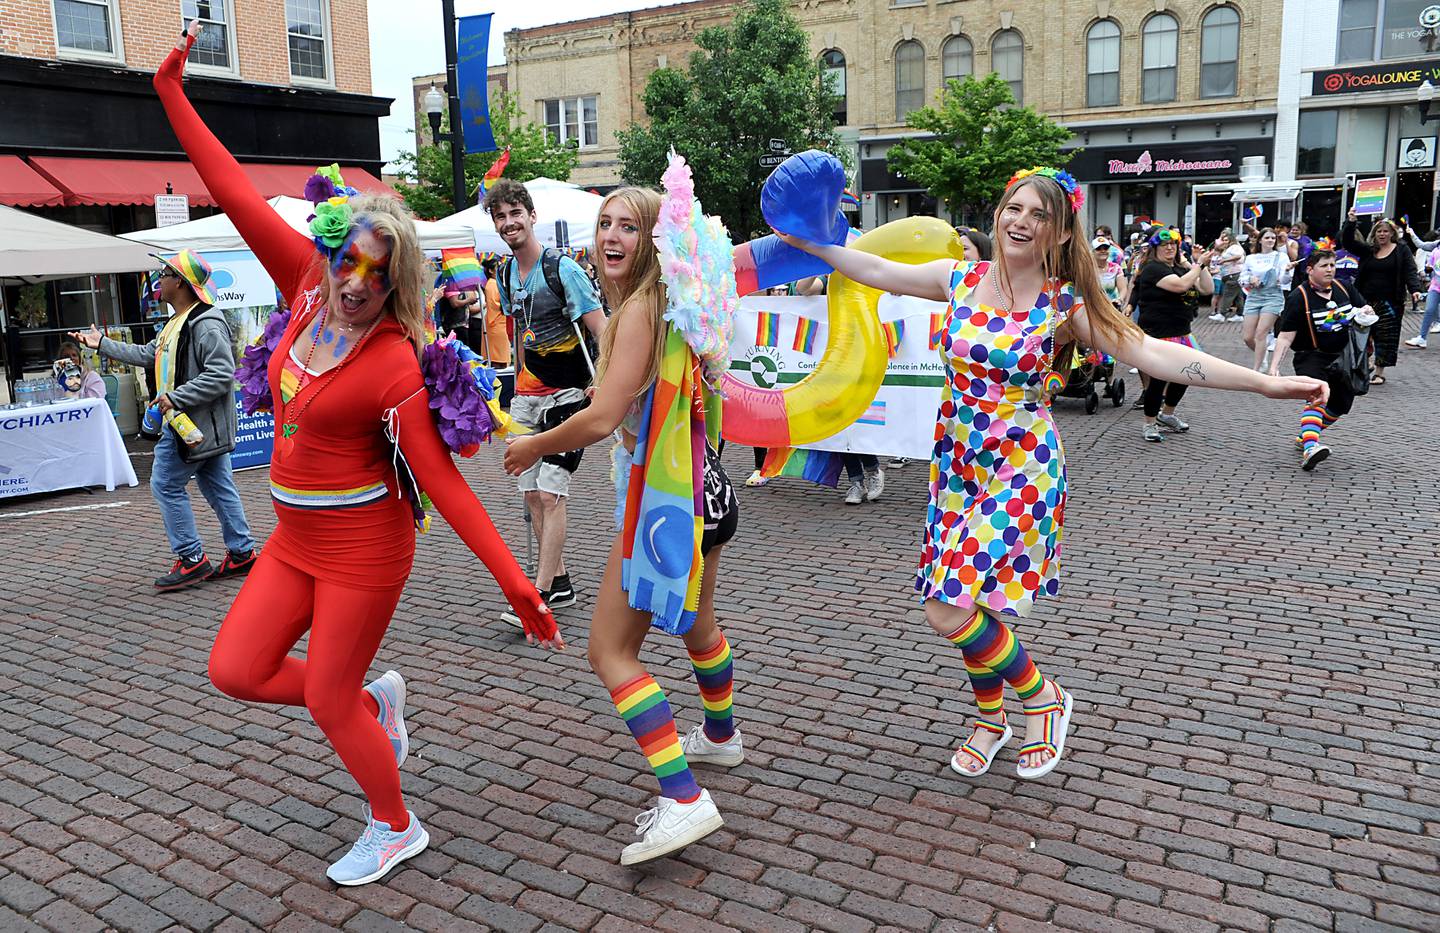 Vicki, Gigi and Jayley Clark dance during the Woodstock PrideFest Parade Sunday, June 12, 2022, around the historic Woodstock Square. The parade, that is its third year, featured over 50 entries for the crowd of around 4,000 people to enjoy, according to city officials.